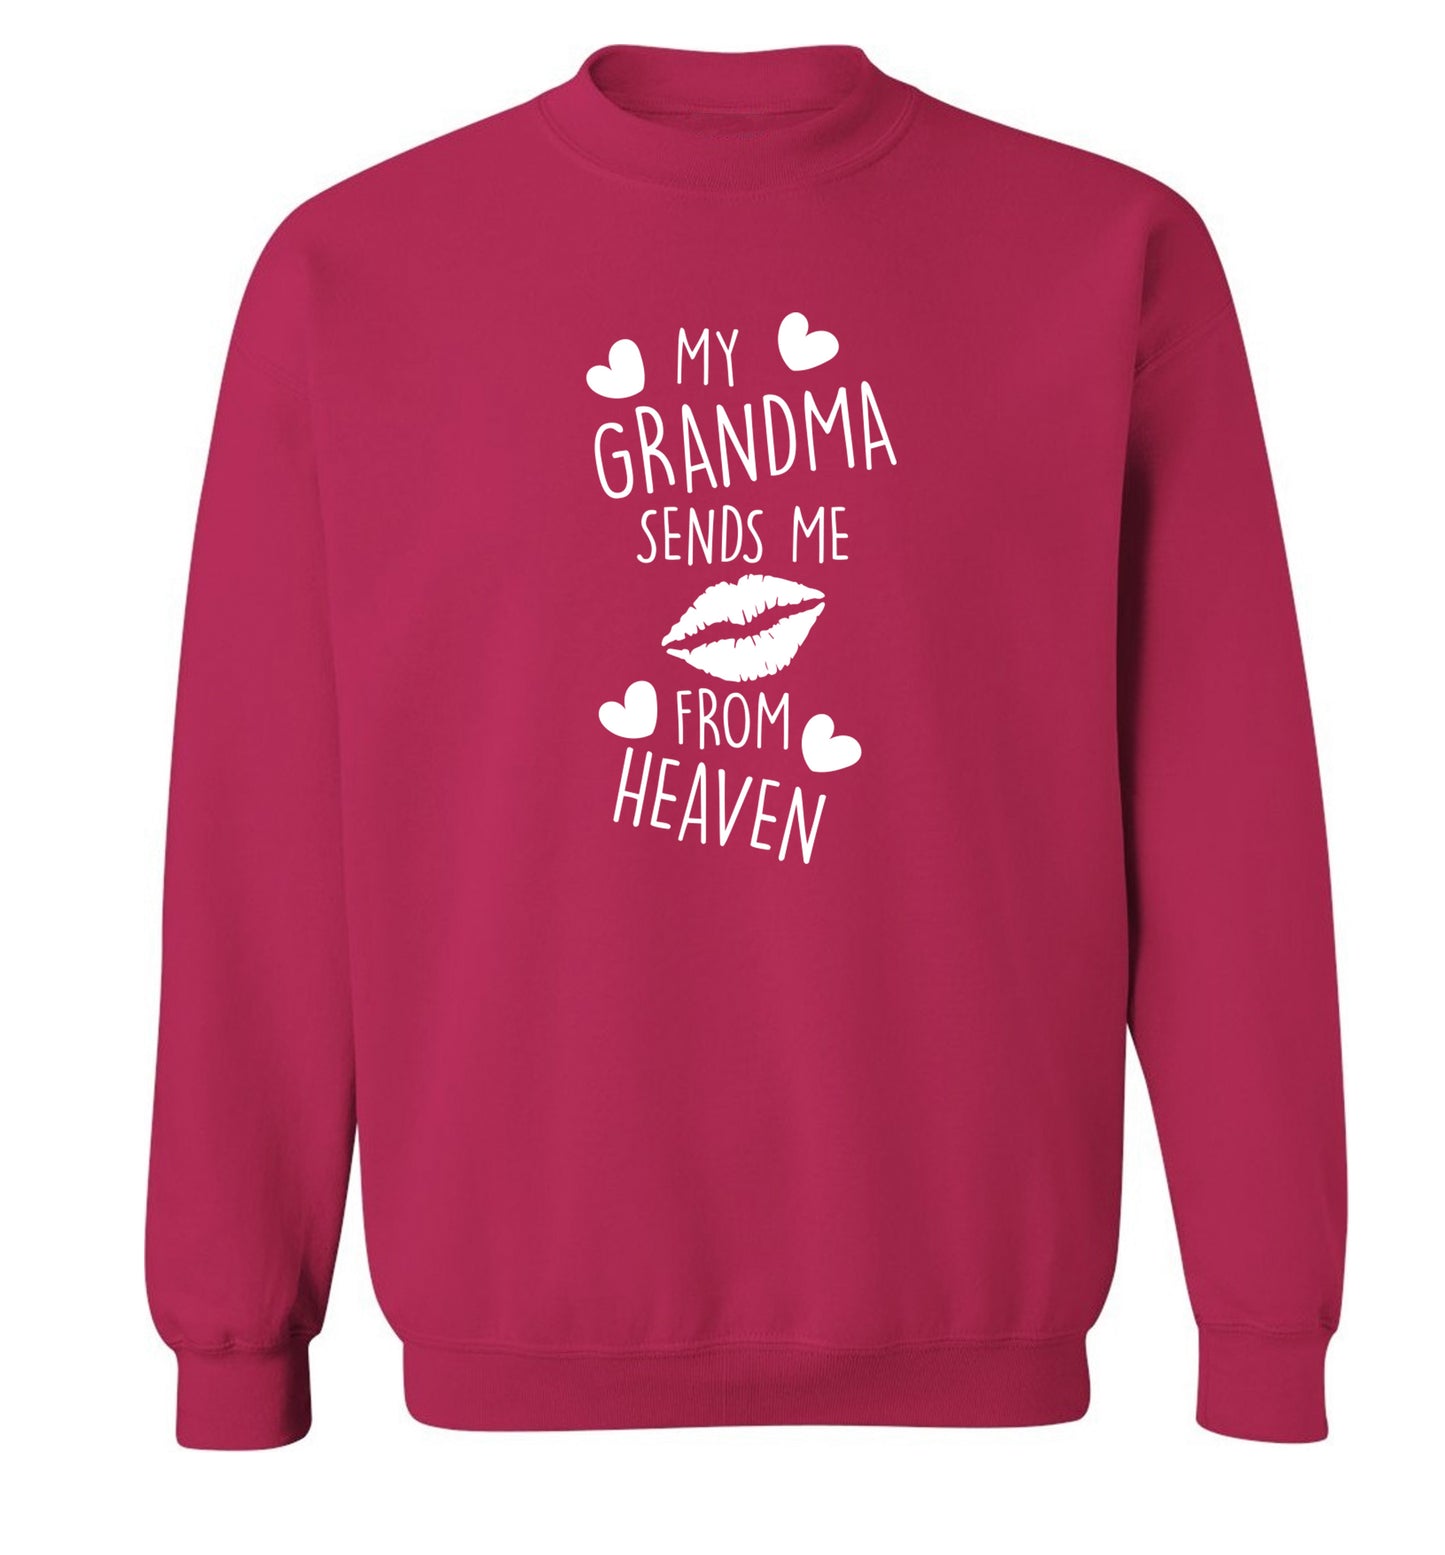 My grandma sends me kisses from heaven Adult's unisex pink Sweater 2XL